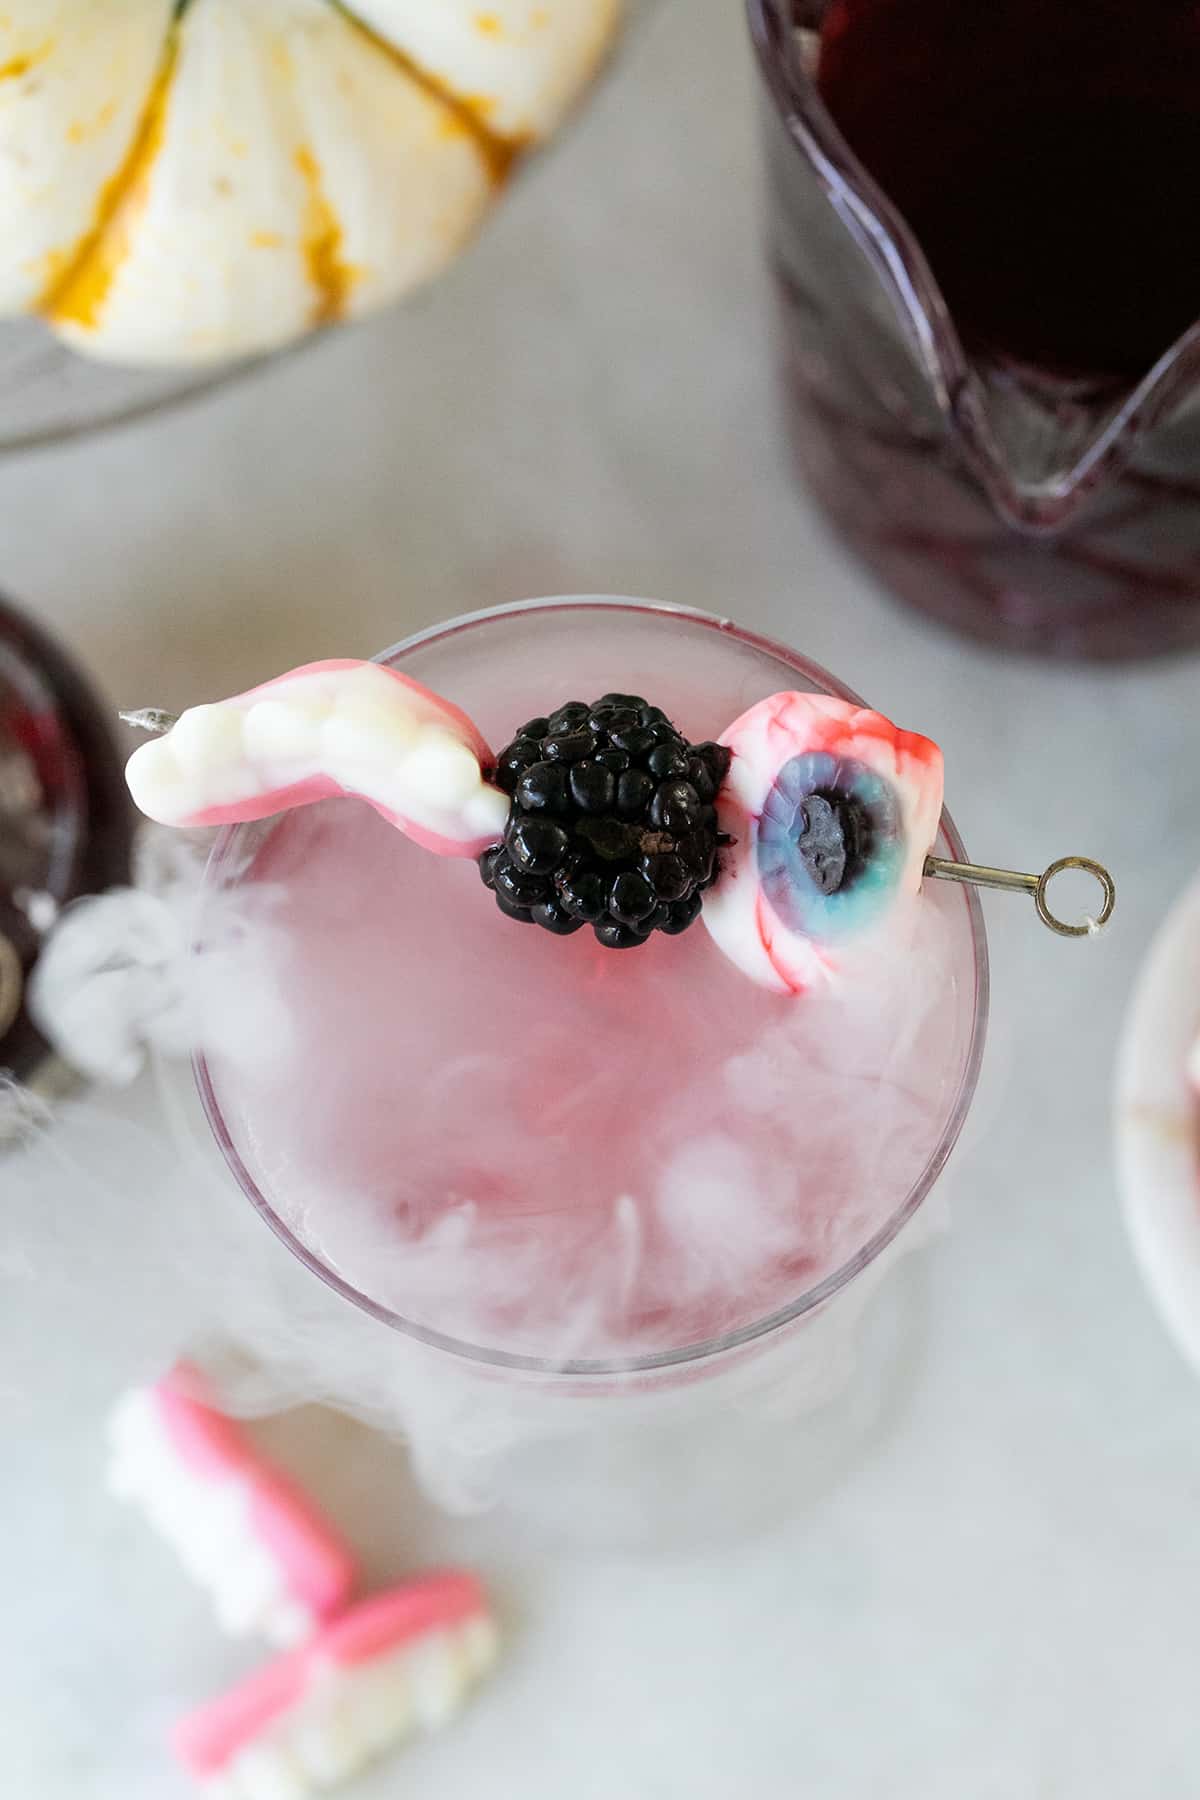 Cocktail with dry ice and gummy eye candy skewer.